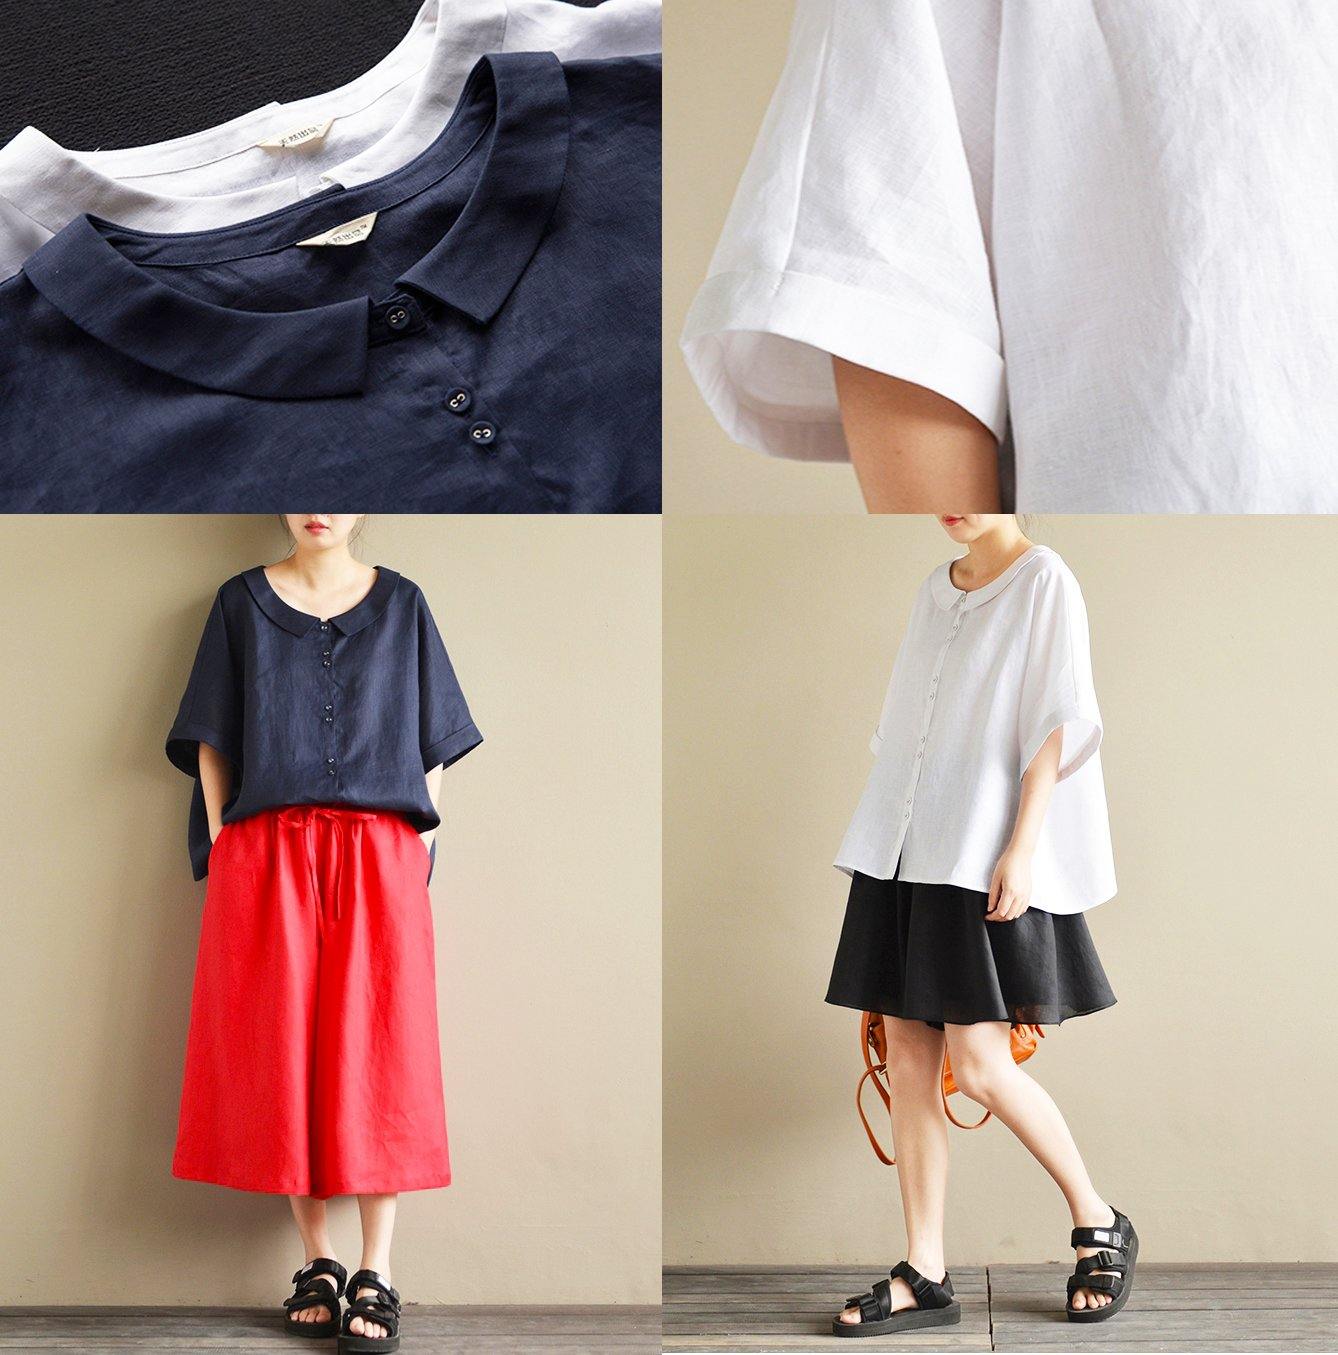 baggy loose white linen women blouse oversize tops Peter pan Collar shirts - Omychic